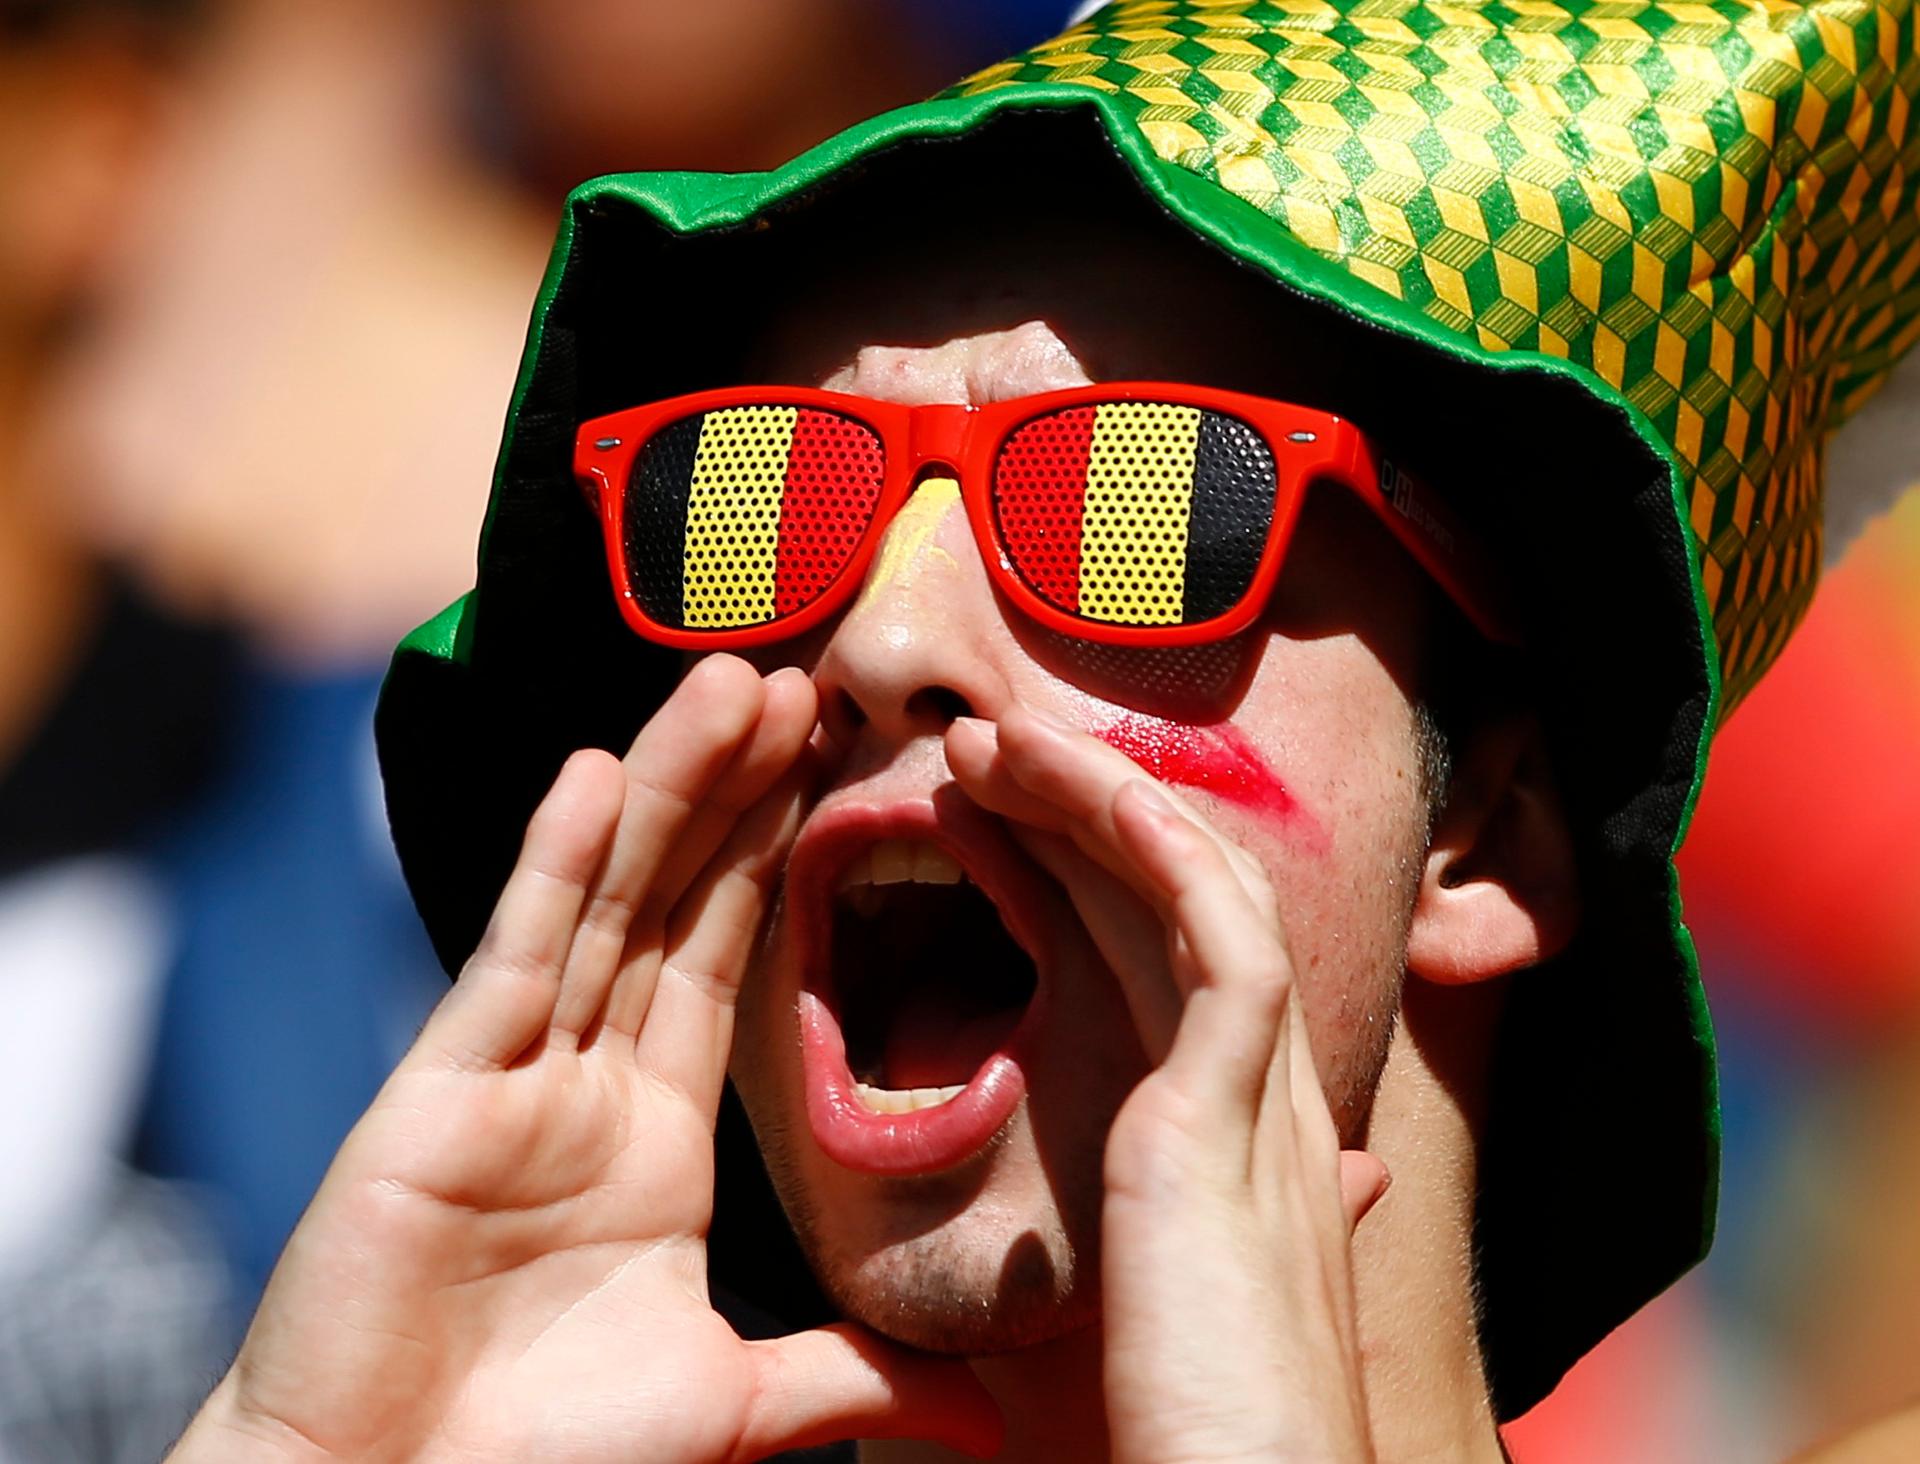 A Belgium fan shouts before the 2014 World Cup Group H soccer match between Belgium and Algeria at the Mineirao stadium in Belo Horizonte